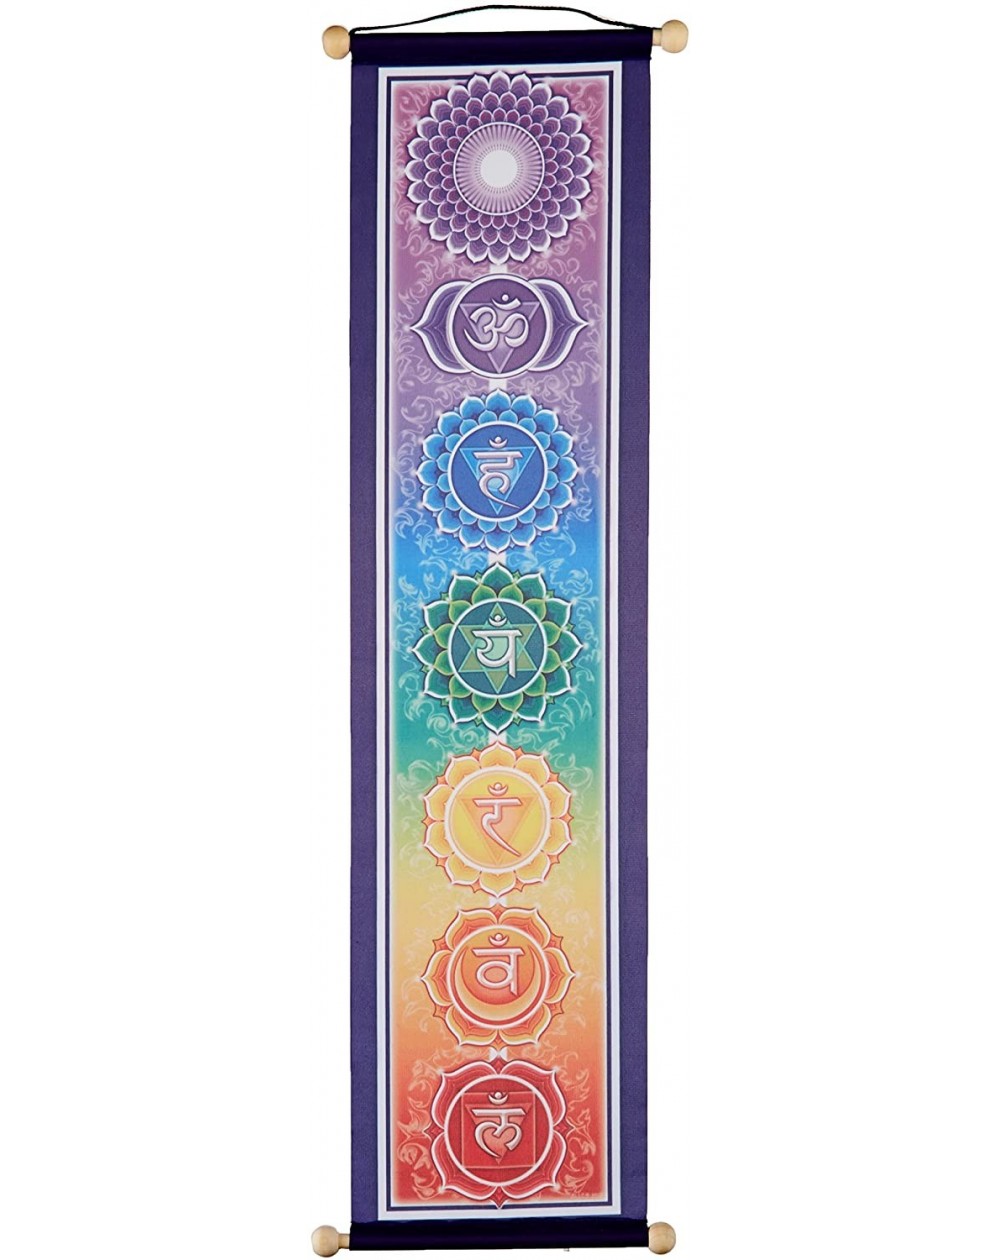 Banners & Garlands 6" X 24" Small Chakra Banner- By Bryon Allen - CQ11535T42T $13.41